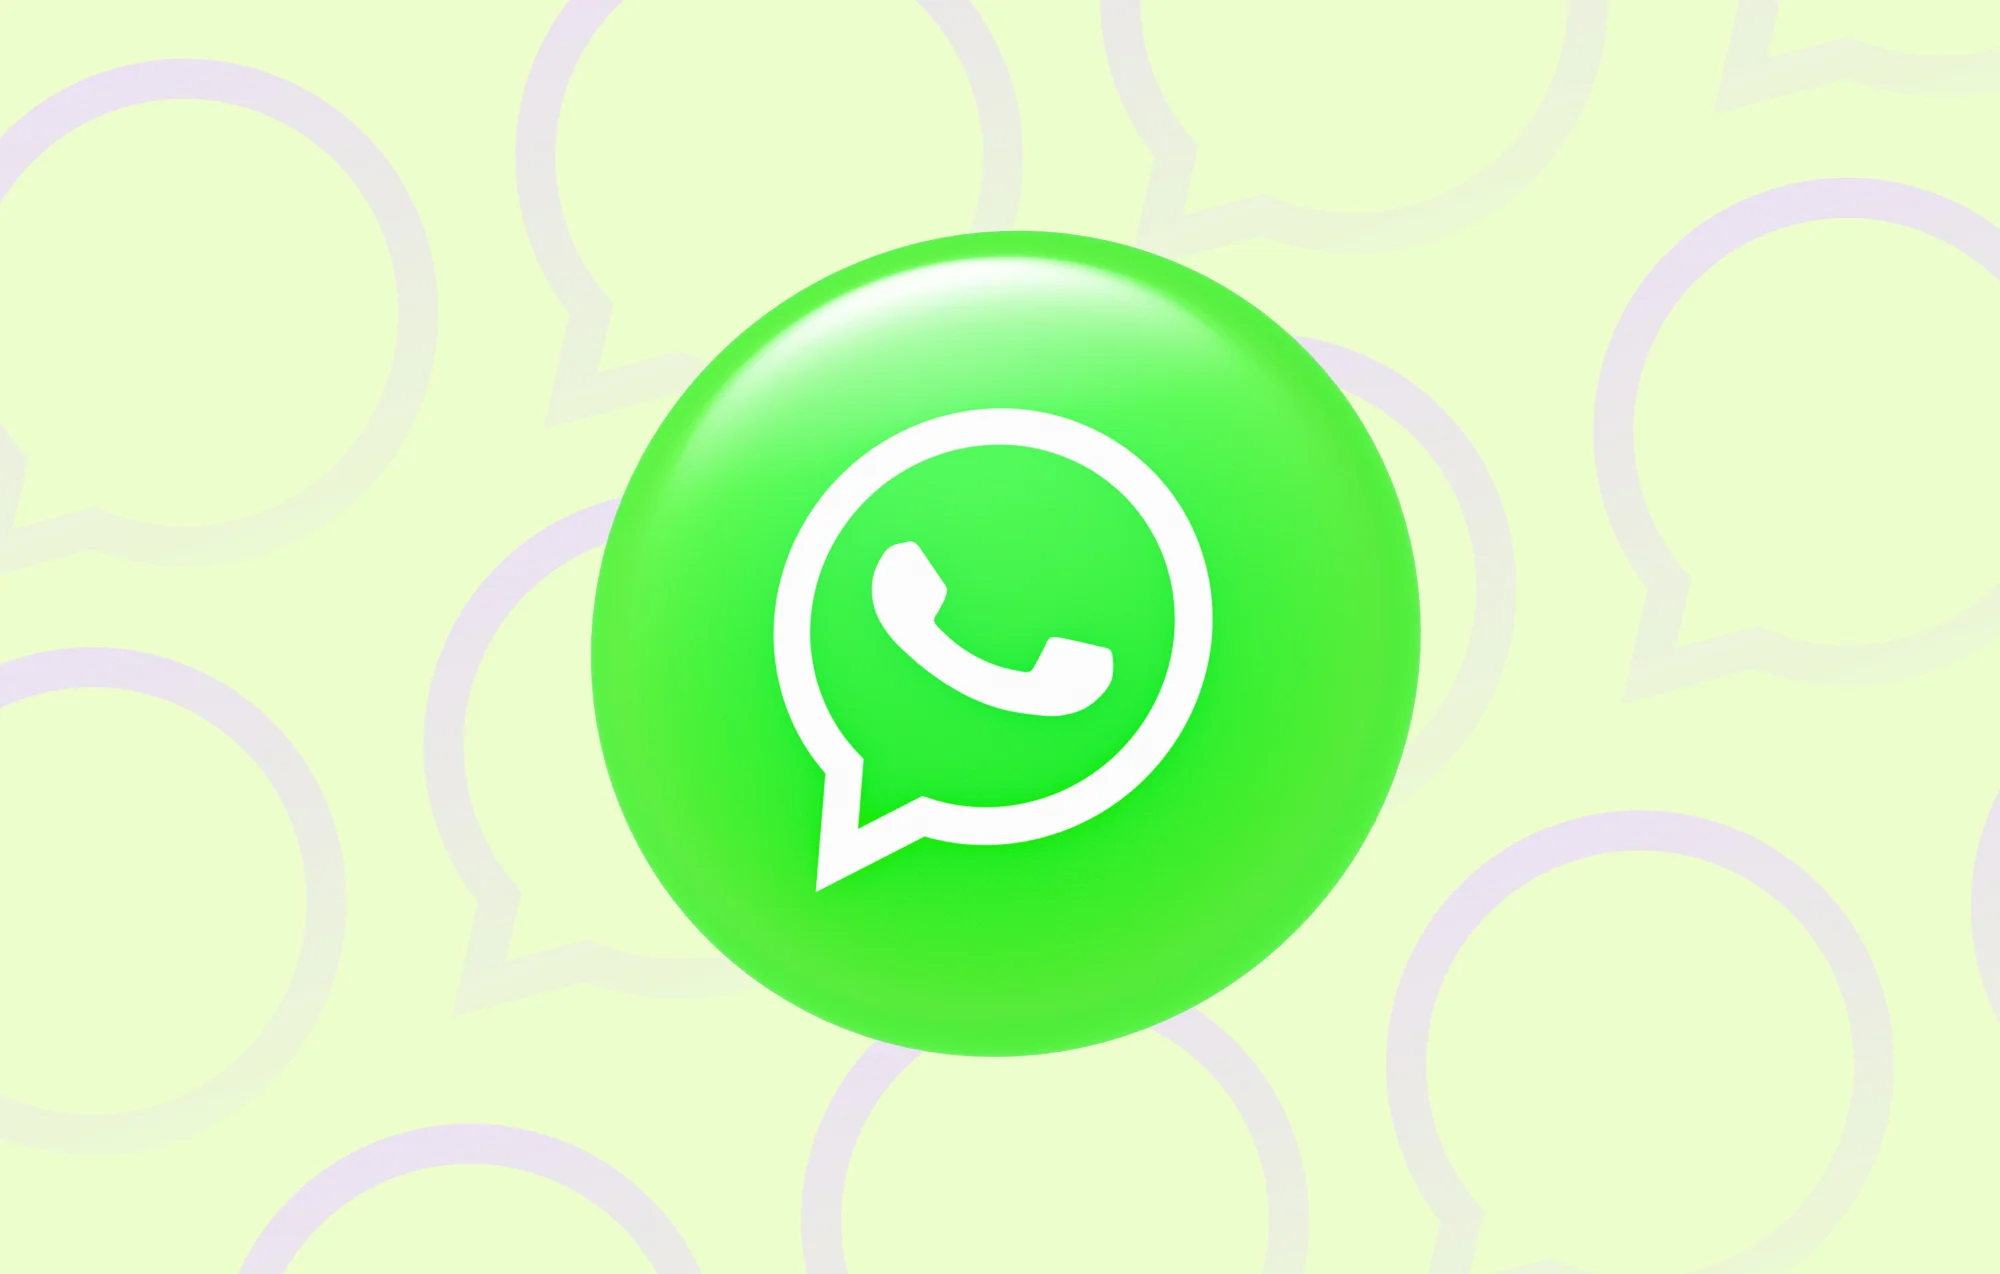 Why is Your WhatsApp Green Now